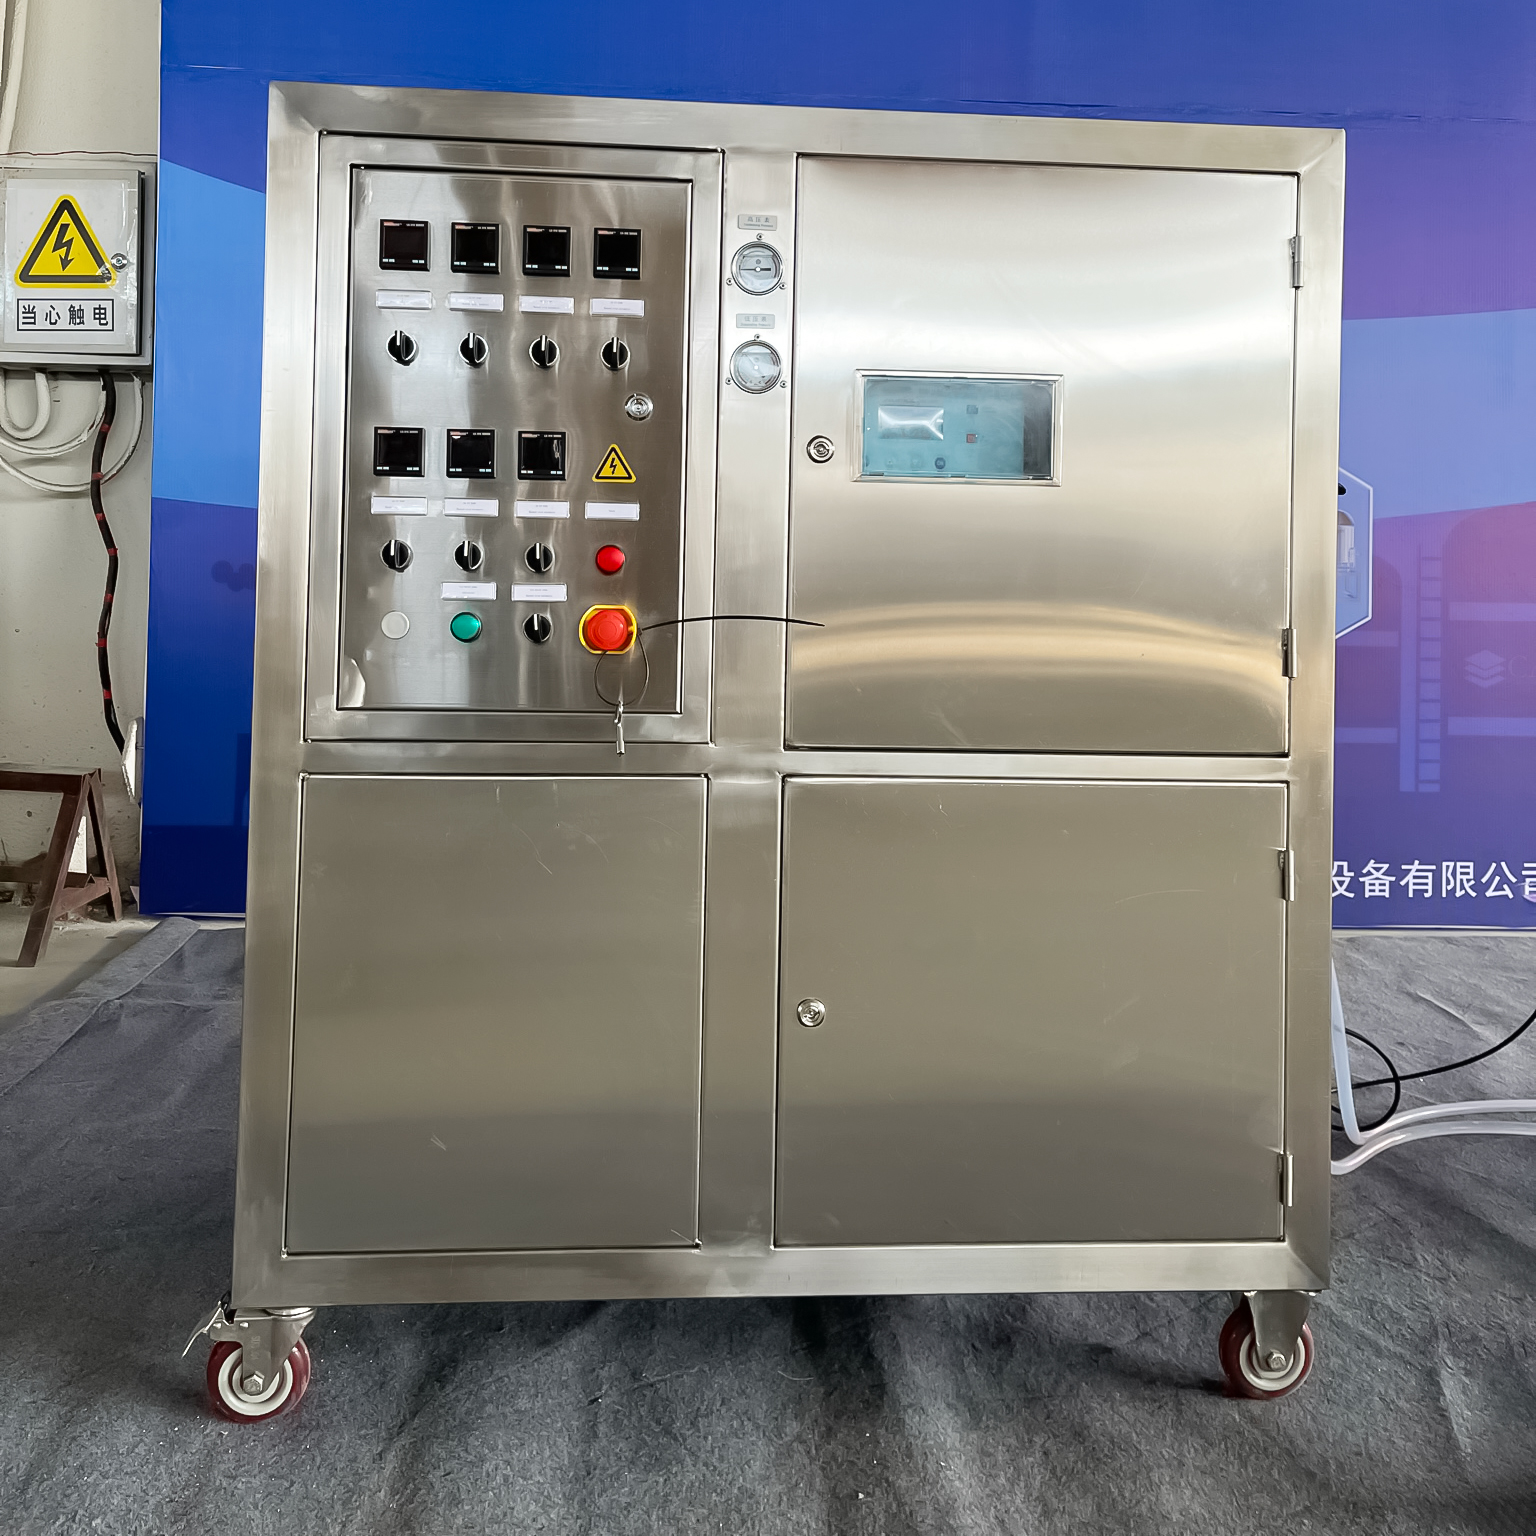 New Cooling Cabinet for Brewing System